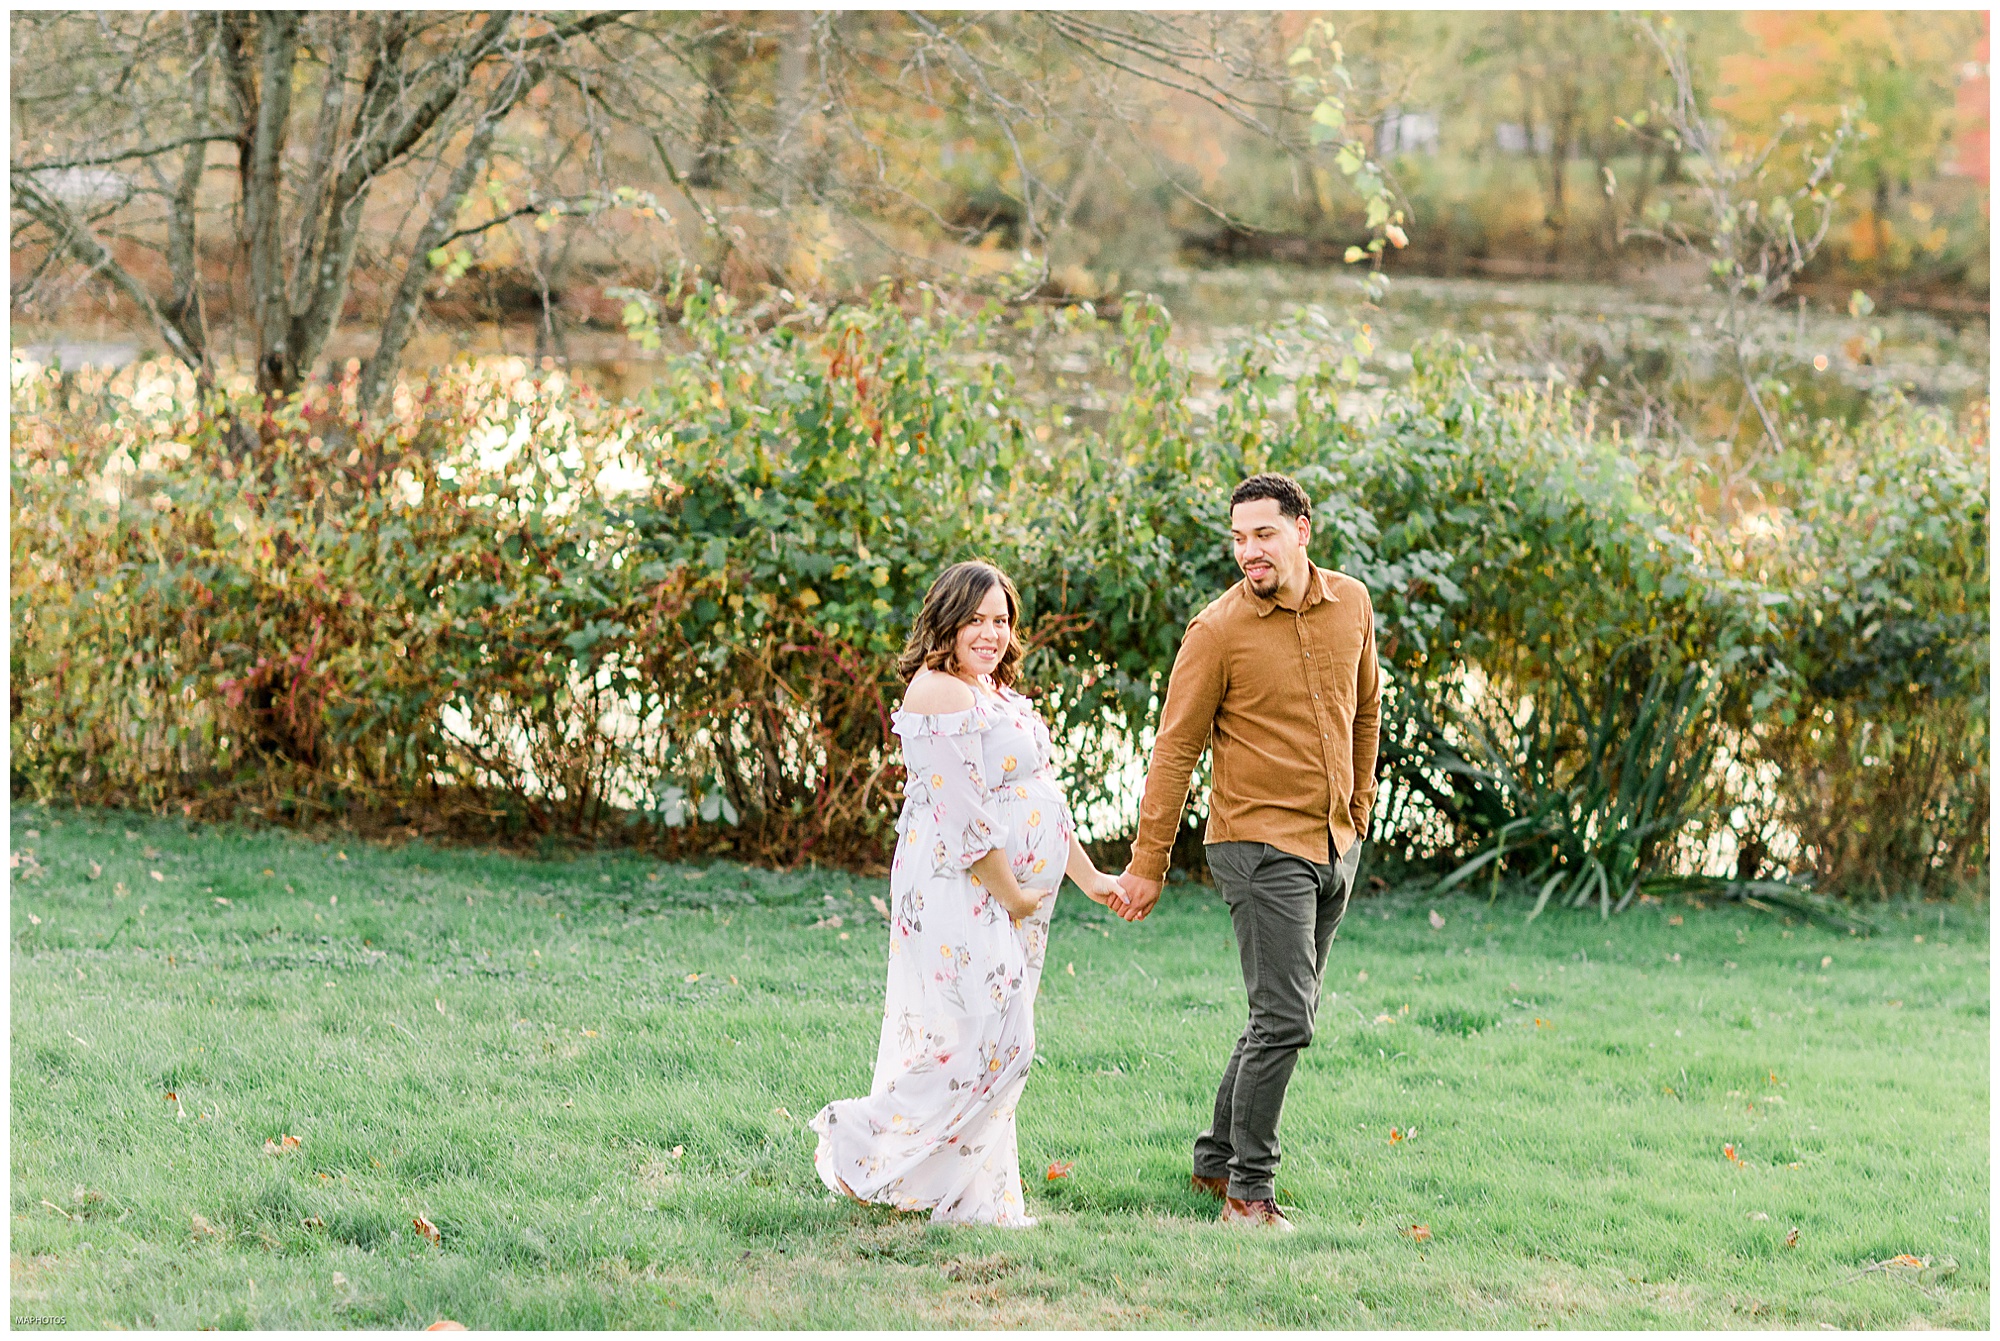 A Family and Maternity Session at Strawberry Park in Moorestown, NJ